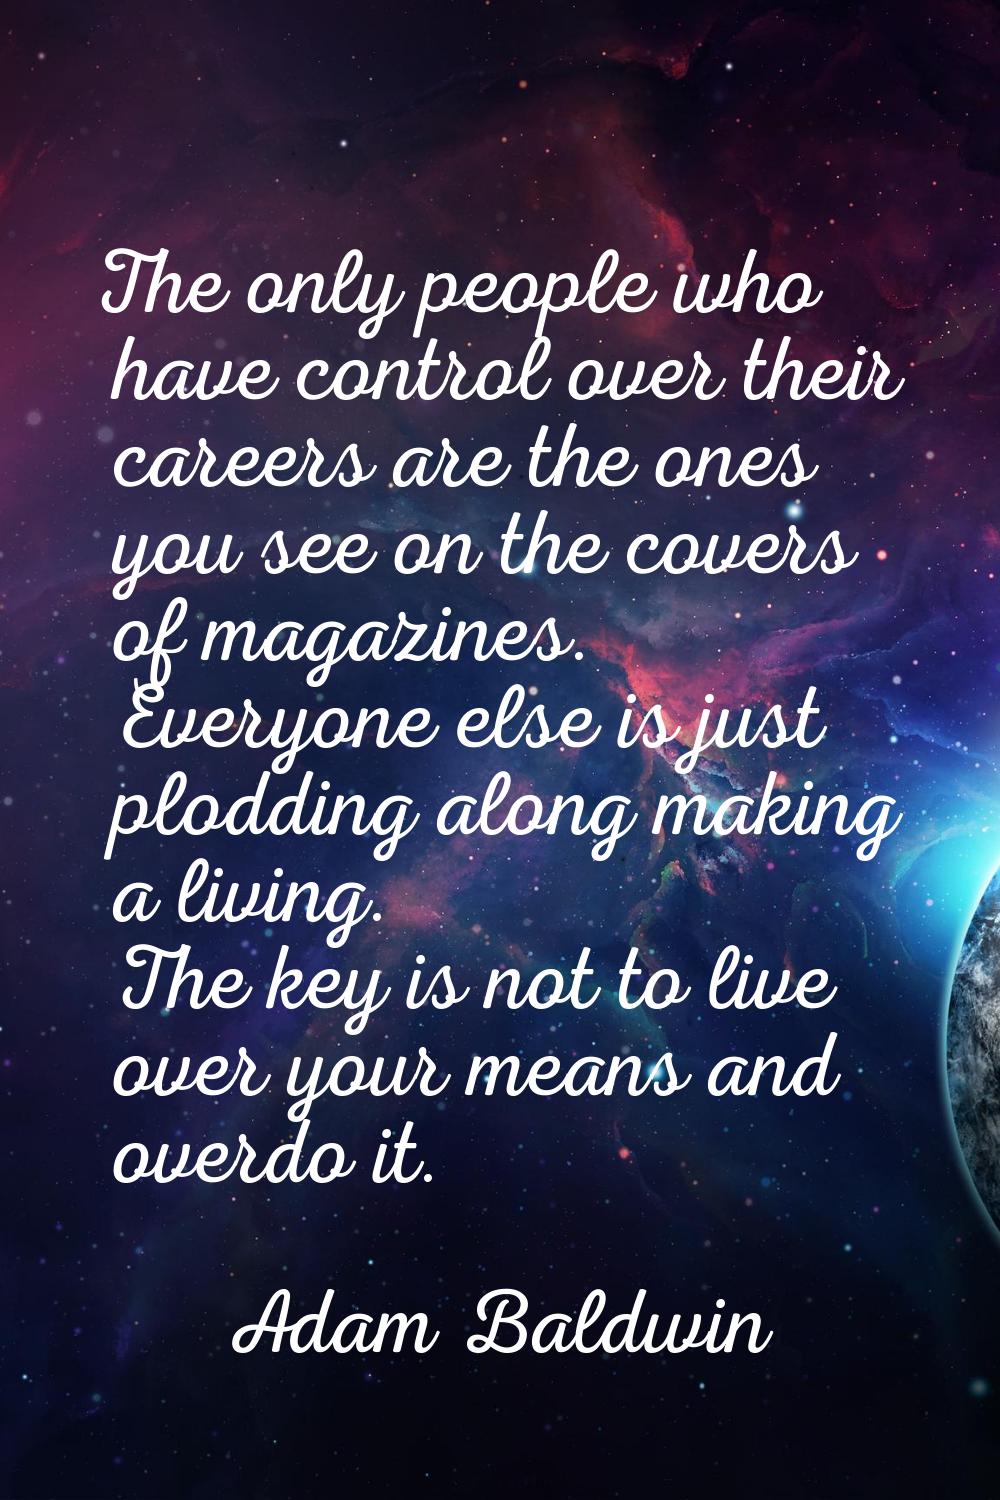 The only people who have control over their careers are the ones you see on the covers of magazines